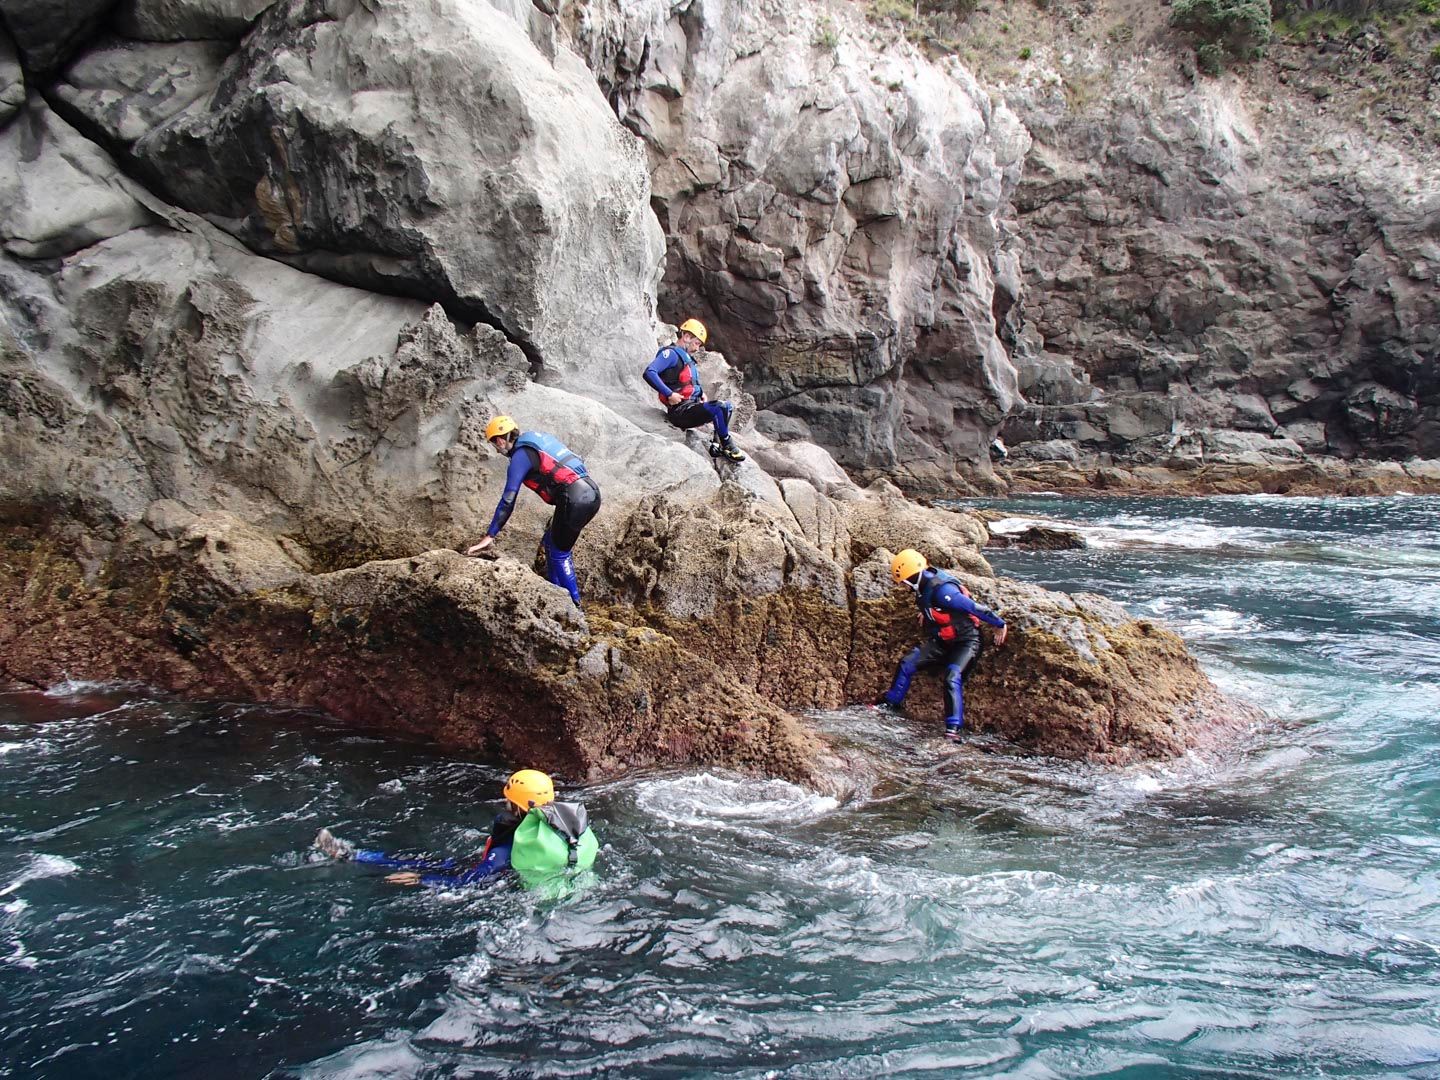 A group of people coasteering in the Azores